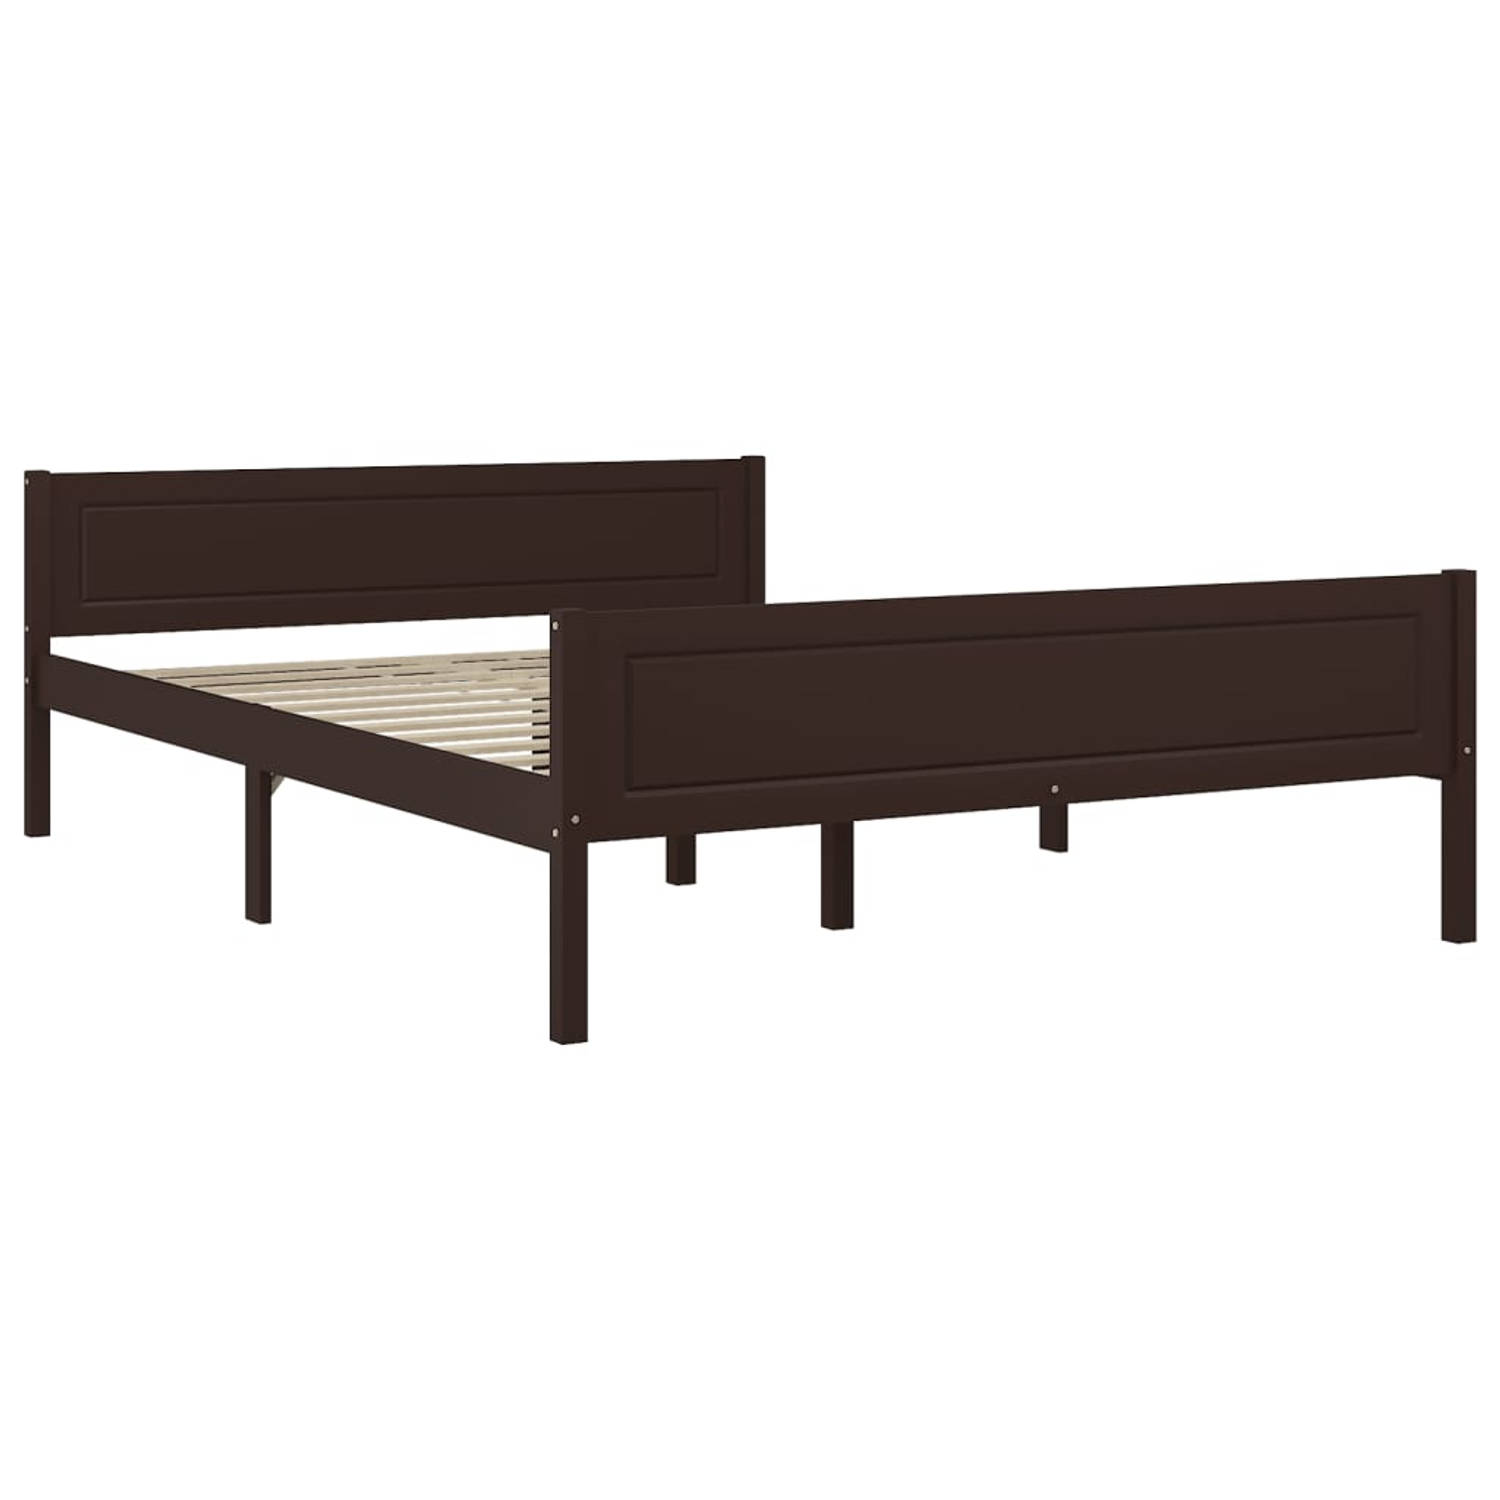 The Living Store Bedframe massief grenenhout donkerbruin 120x200 cm - Bedframe - Bedframe - Bed Frame - Bed Frames - Bed - Bedden - 2-persoonsbed - 2-persoonsbedden - Tweepersoons